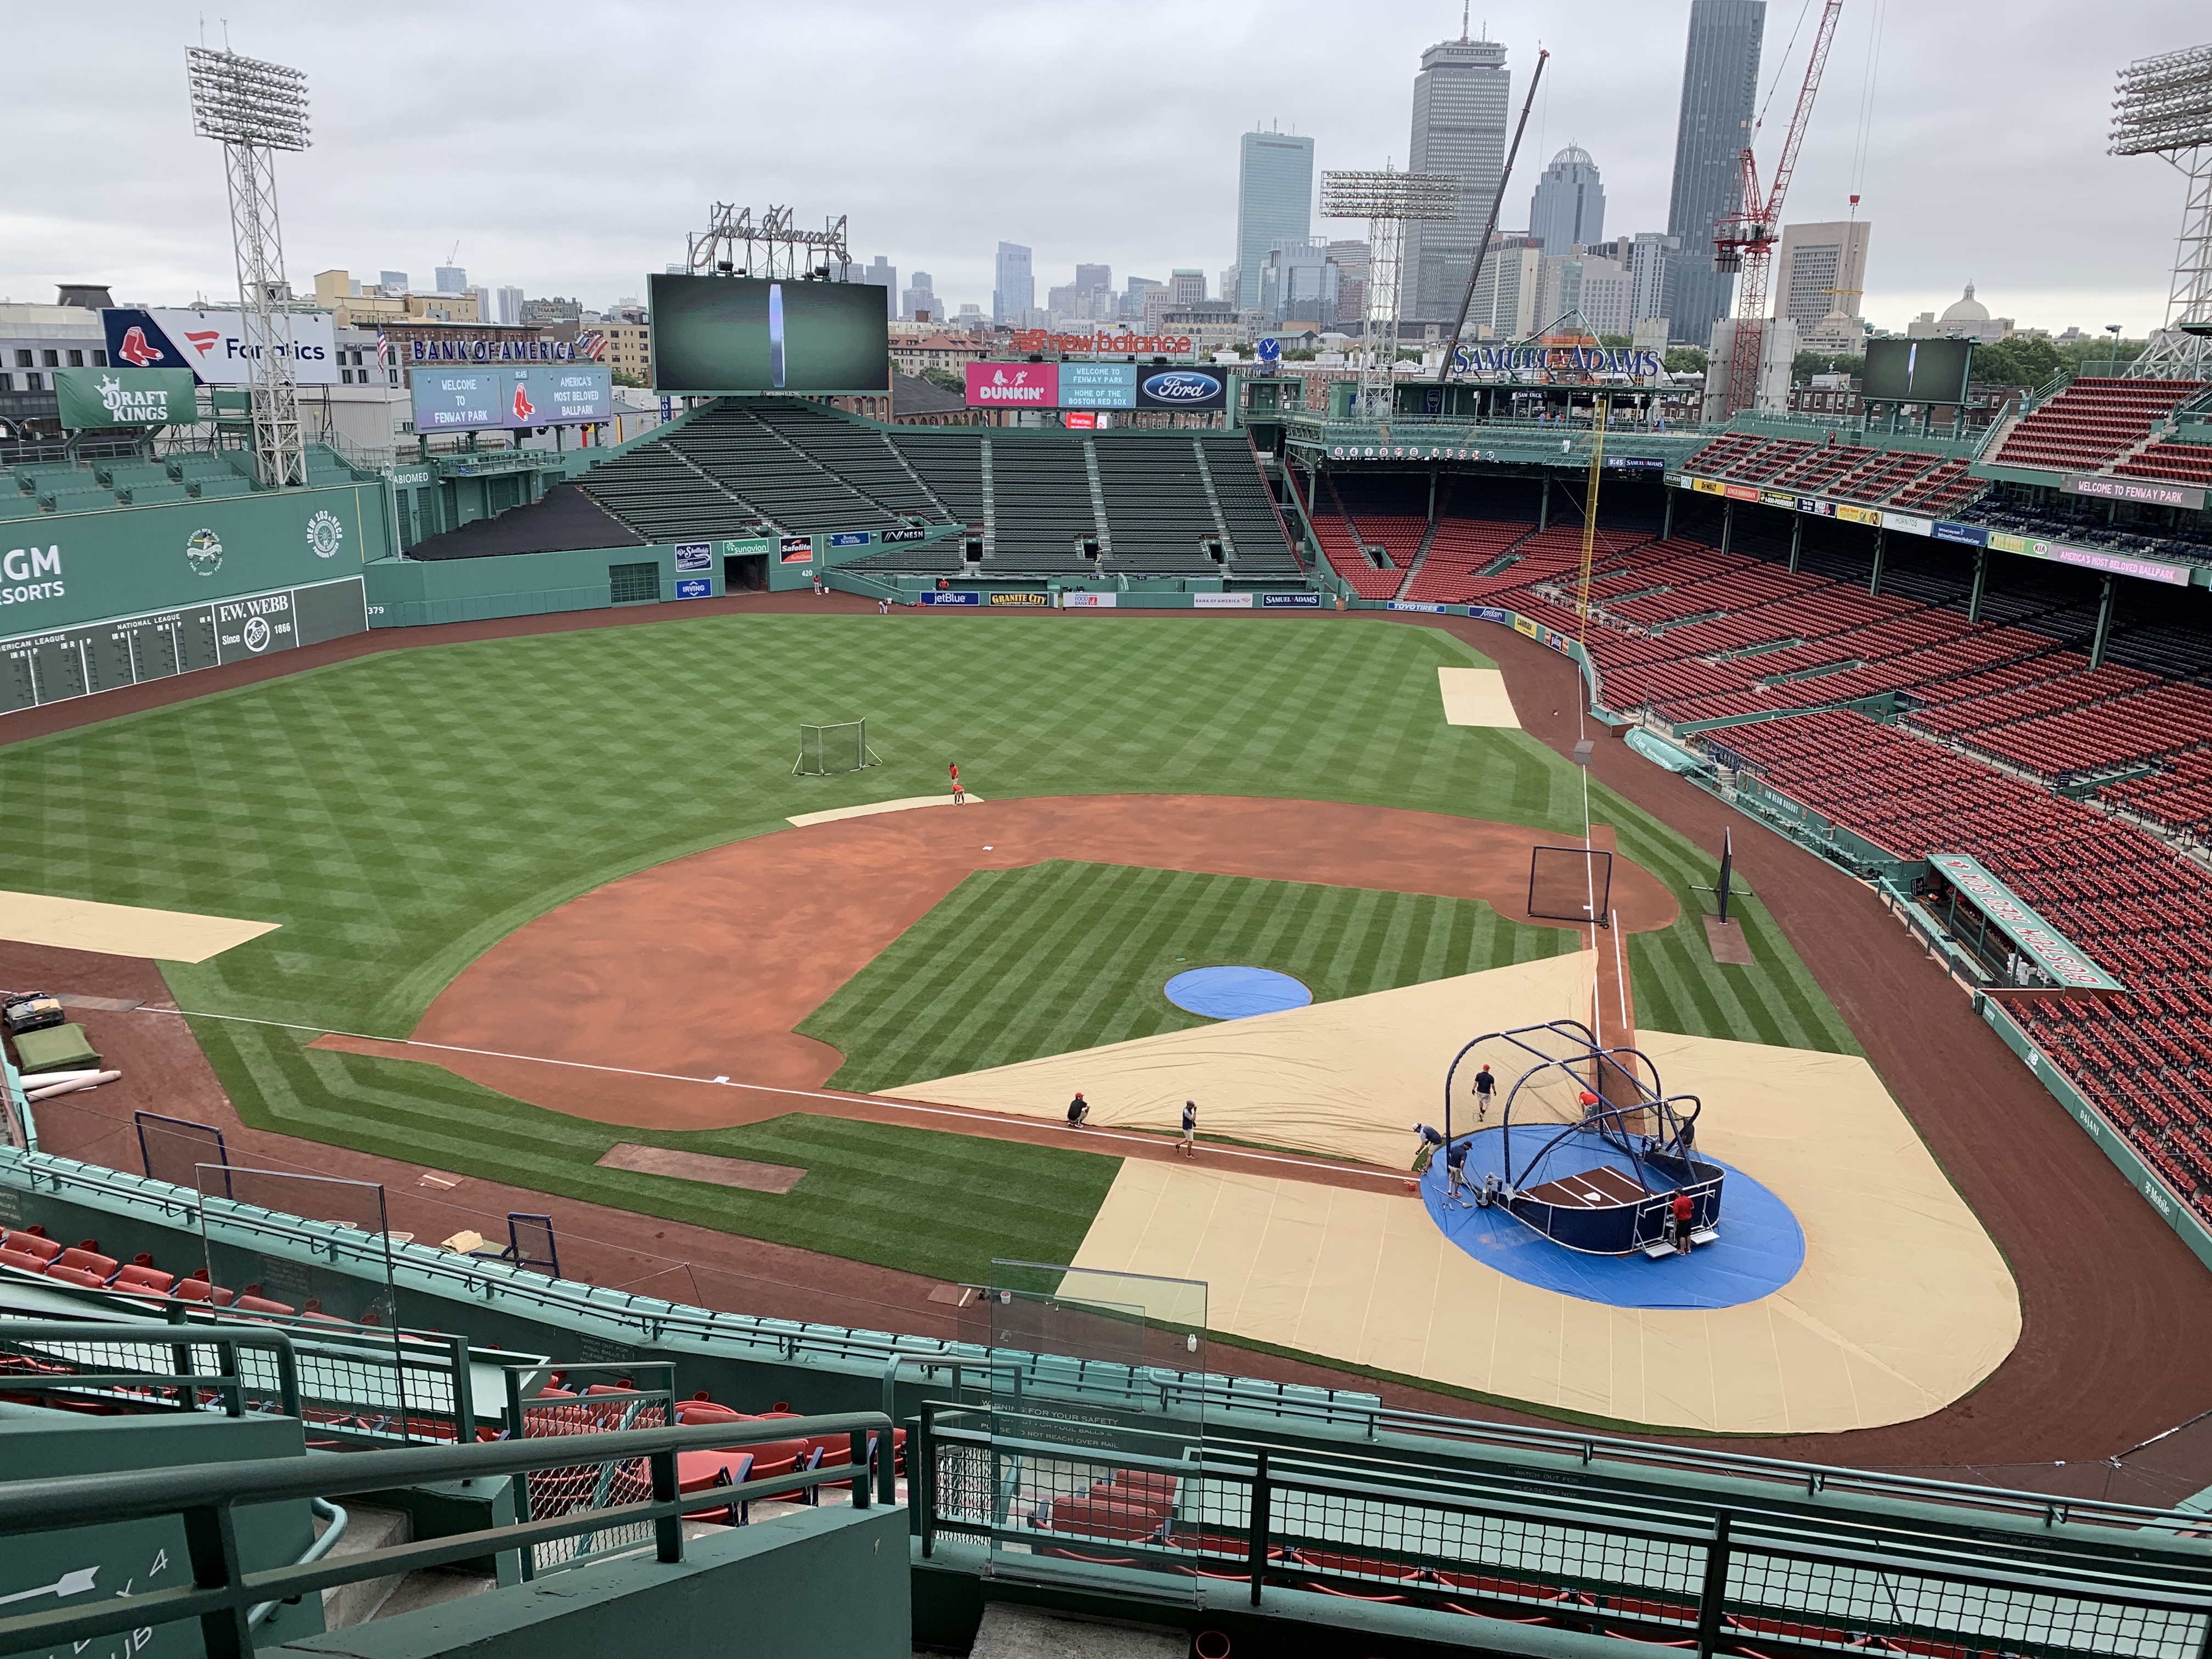 Boston Red Sox summer training camp at Fenway Park: Photos, videos from  first day (Christian Vazquez, Connor Wong among first players to work out)  